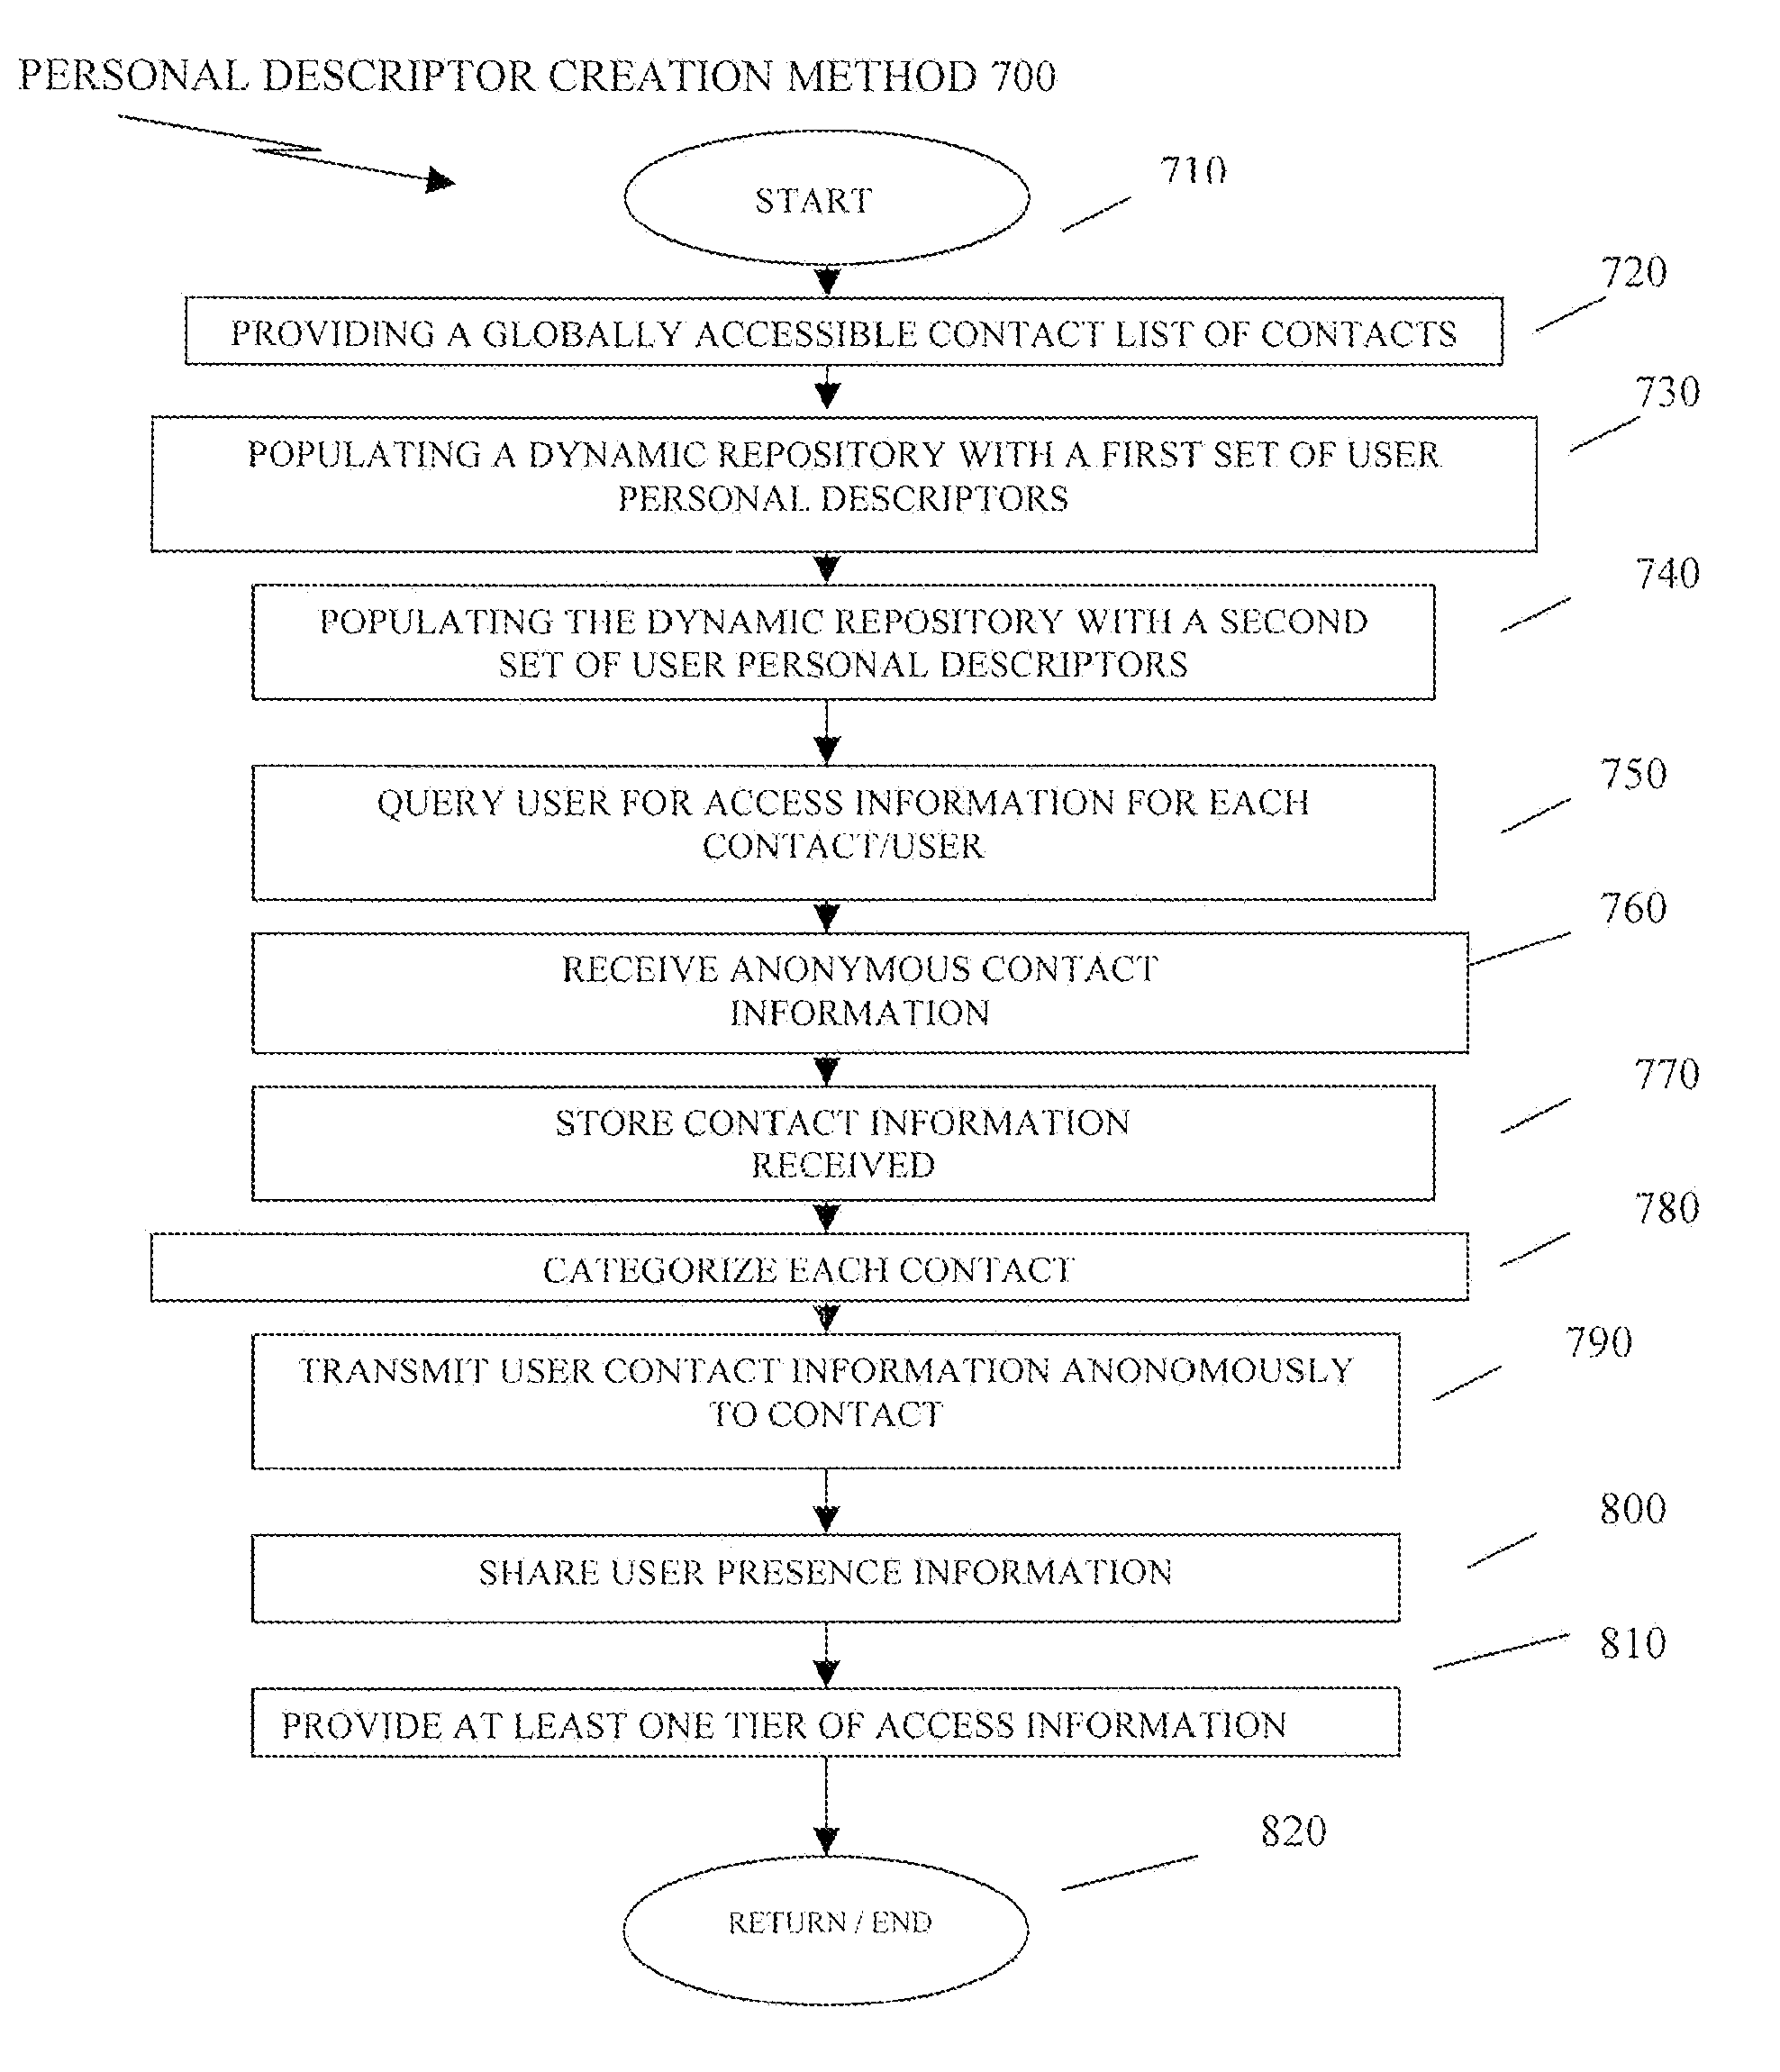 Methods, systems and program products for creation of multiple views and optimized communications pathways based on personal descriptors